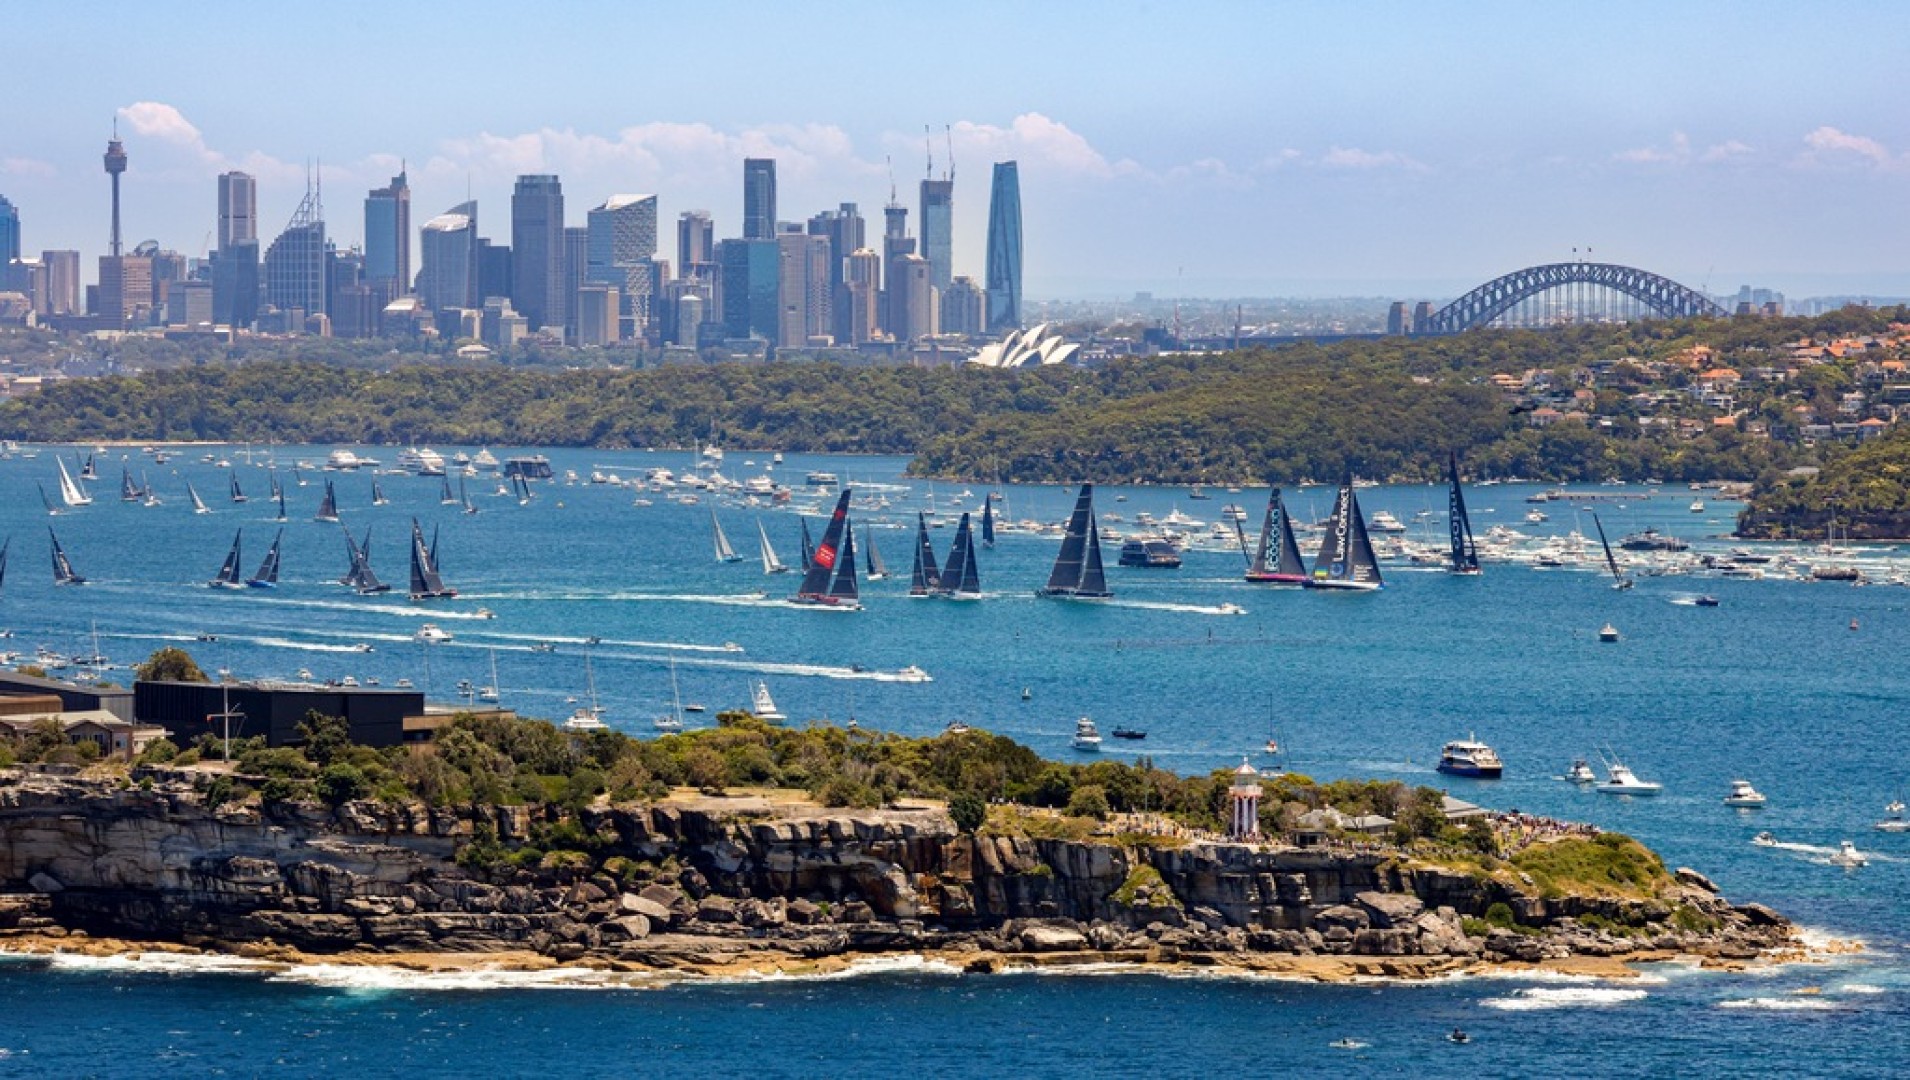 An iconic view of the start of the 2022 Rolex Sydney Hobart Yacht Race © ROLEX/Carlo Borlenghi